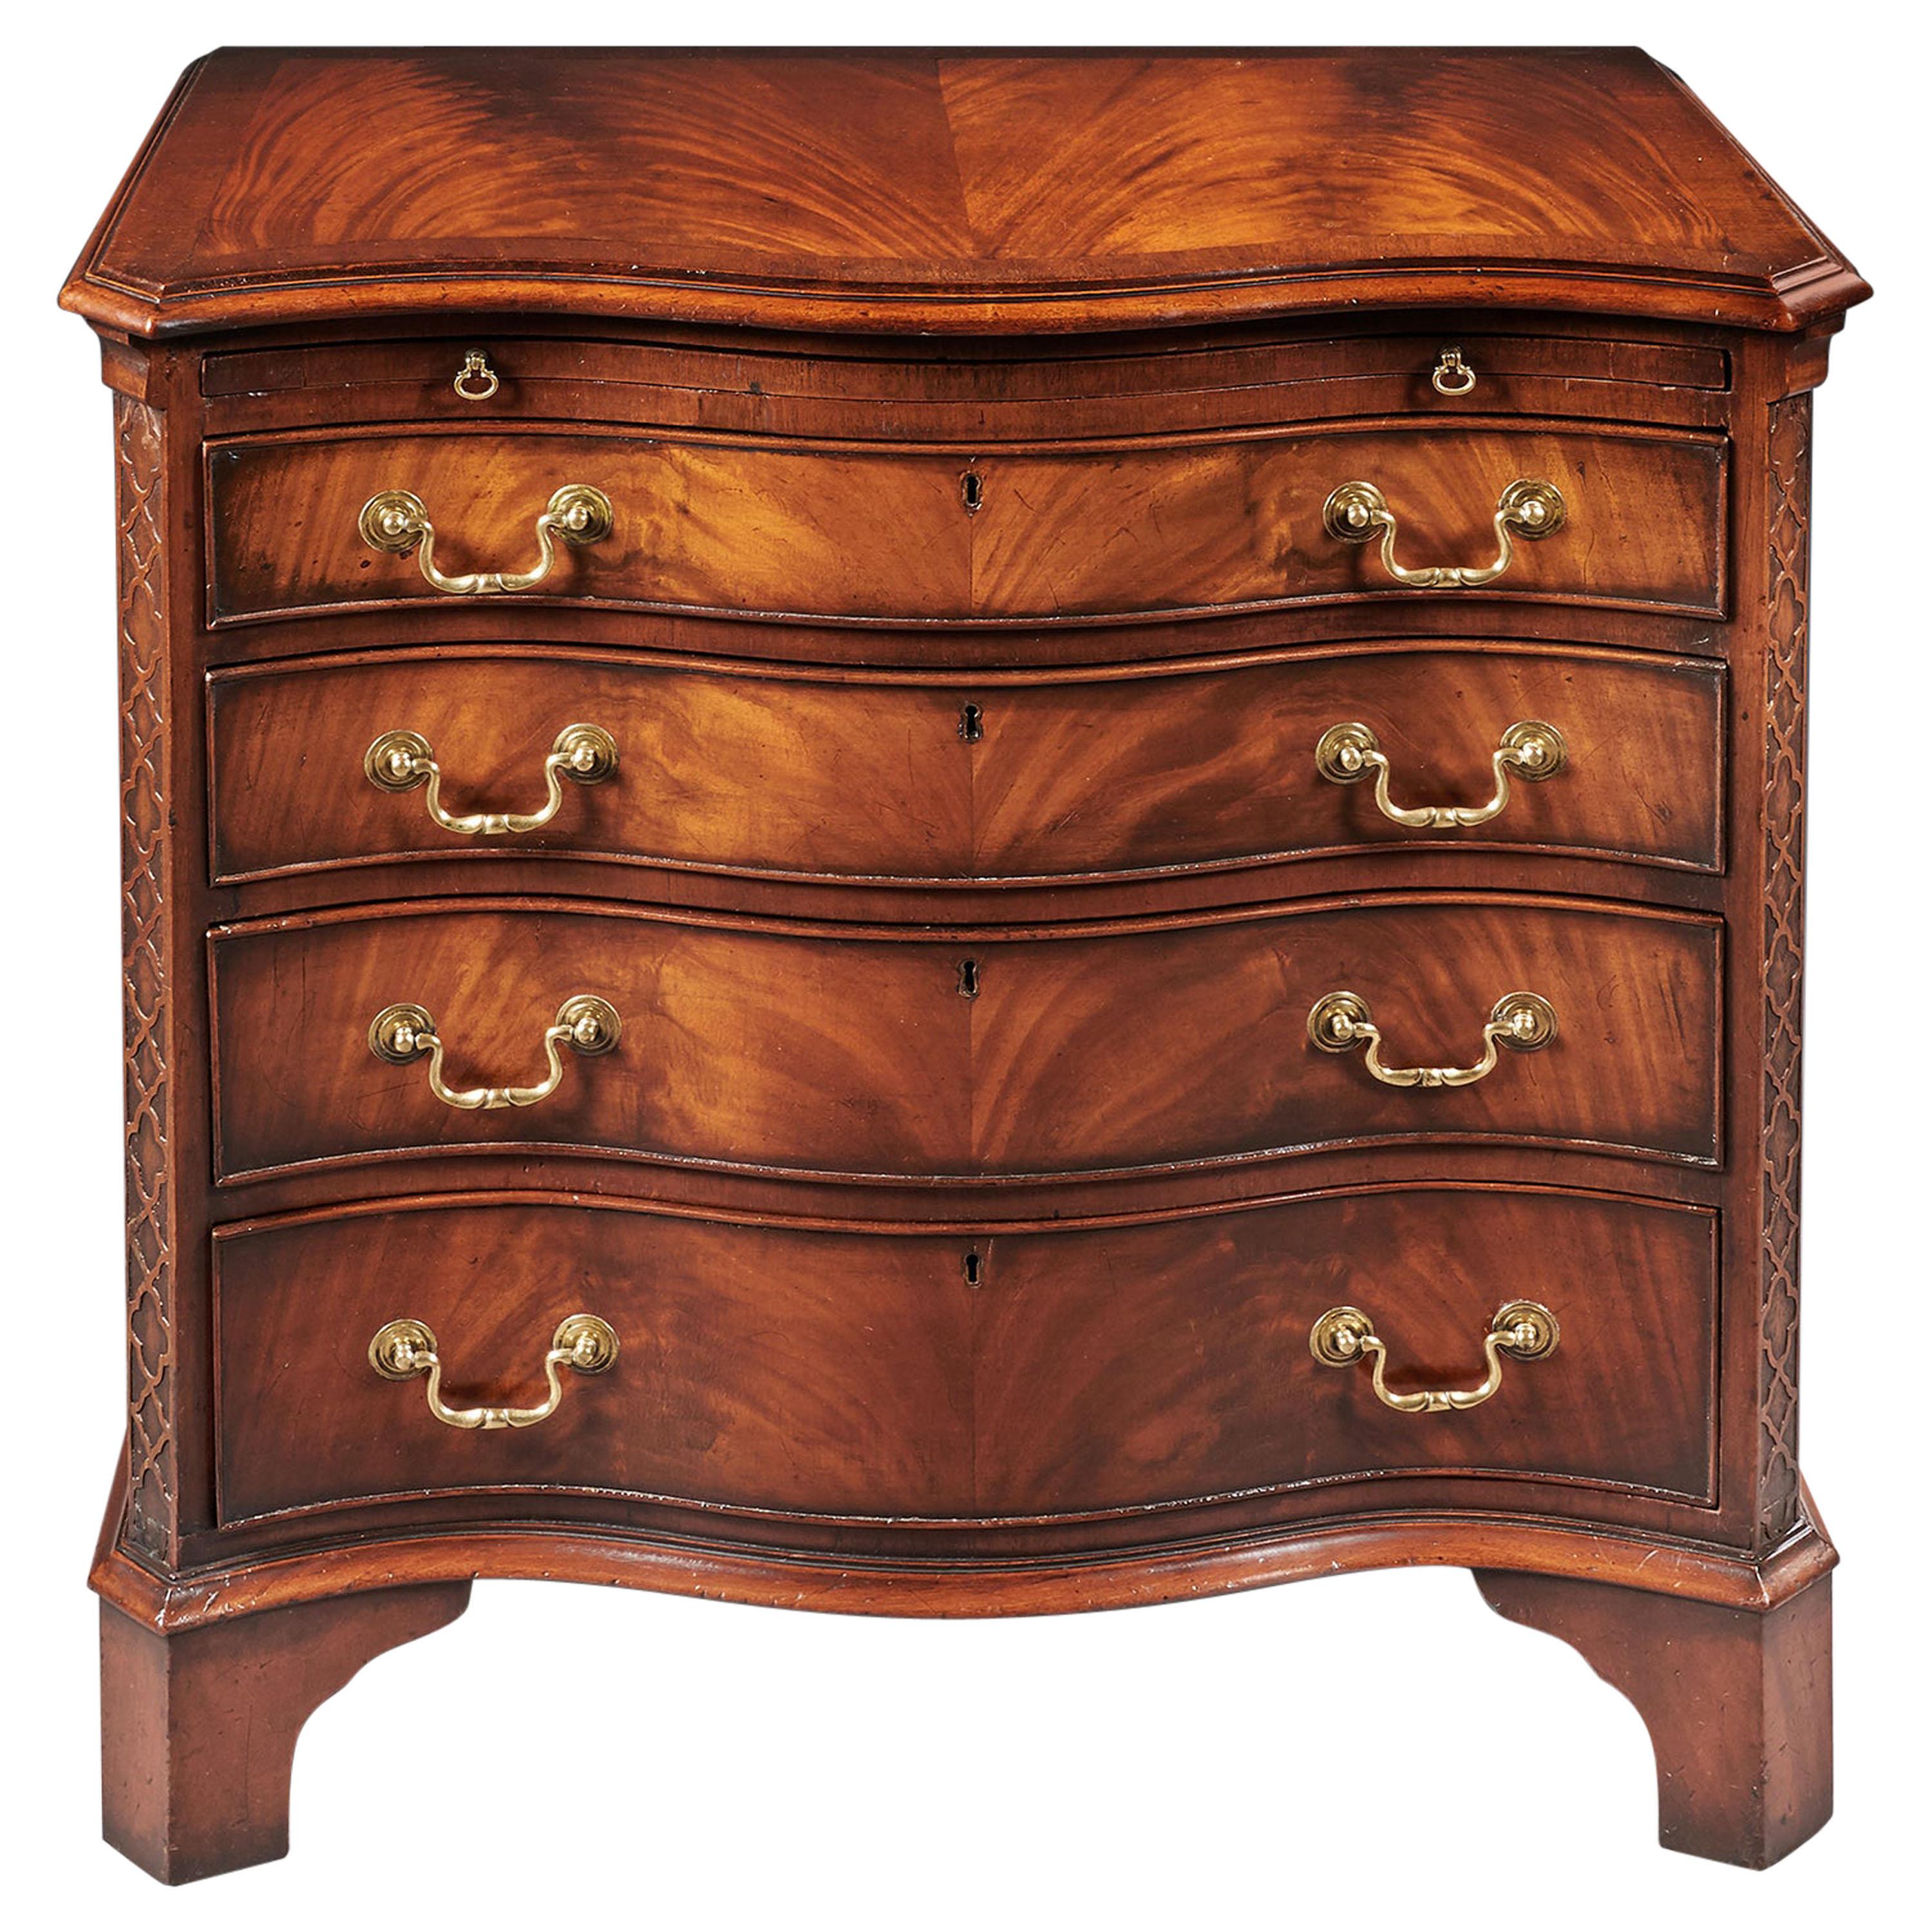 Antique Serpentine Mahogany Chest of Drawers